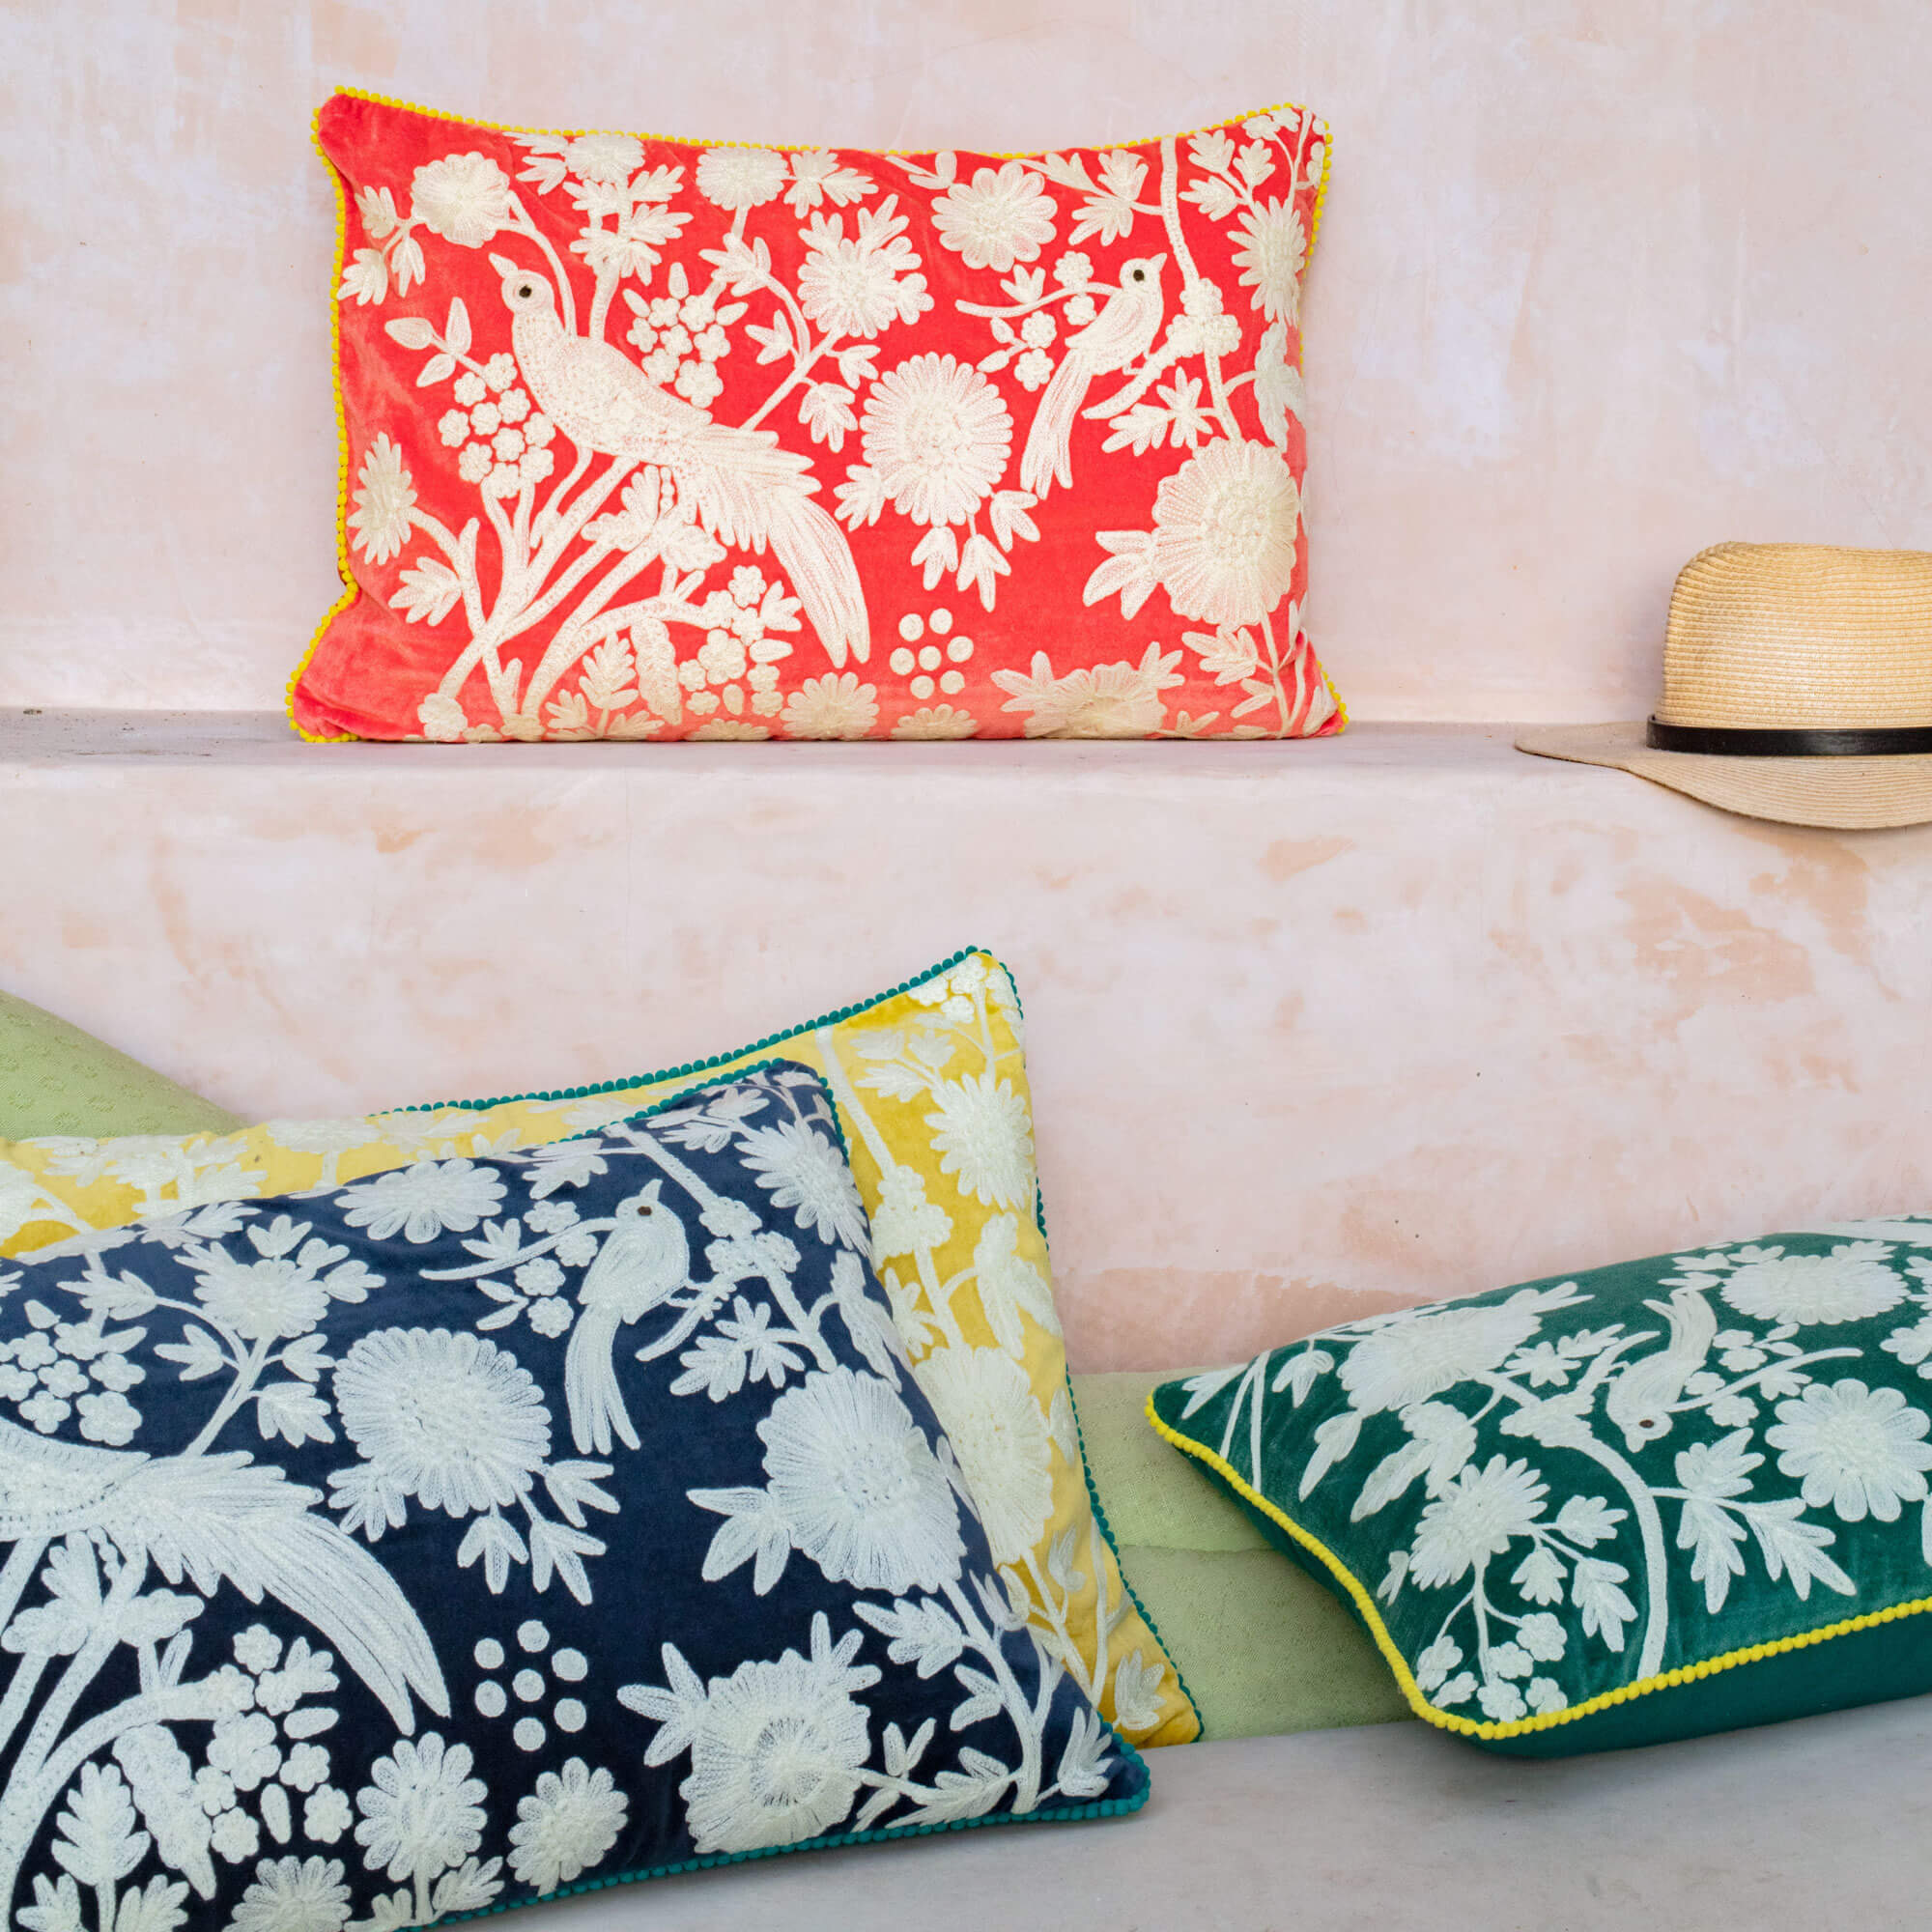 Read more about Graham and green mustard manaus rectangular cushion